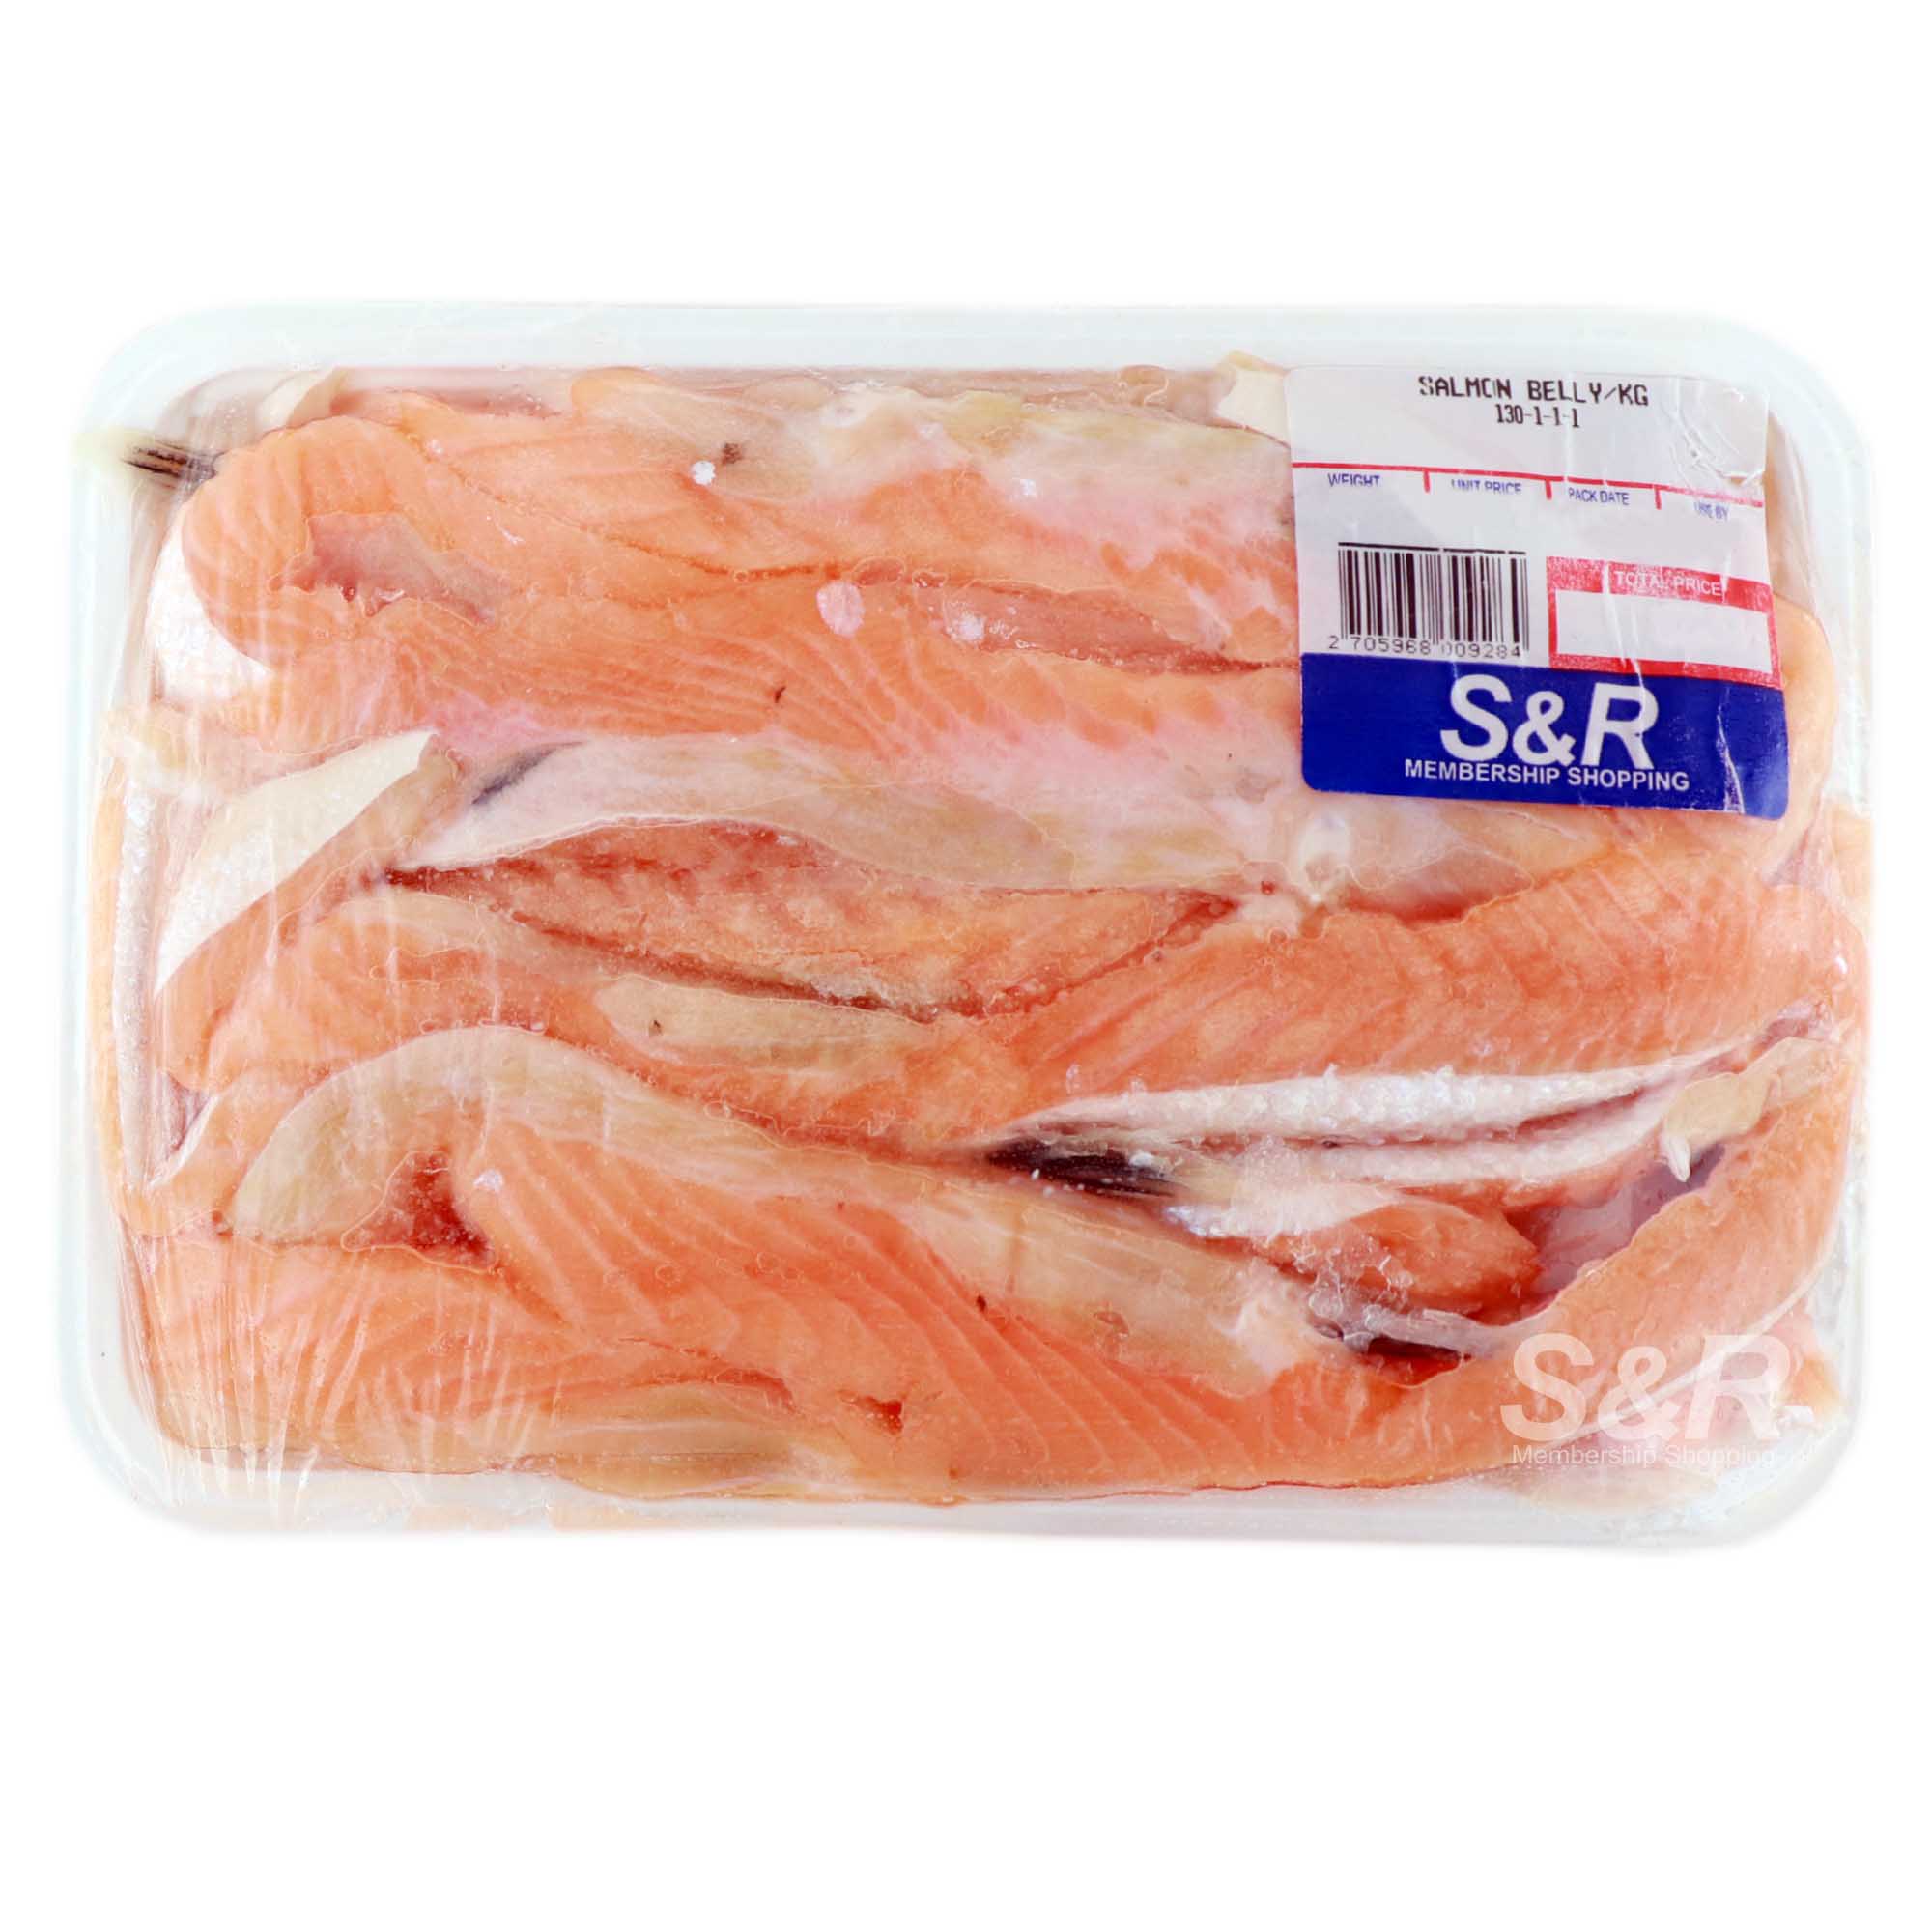 S&R Salmon Belly approx. 1.3kg